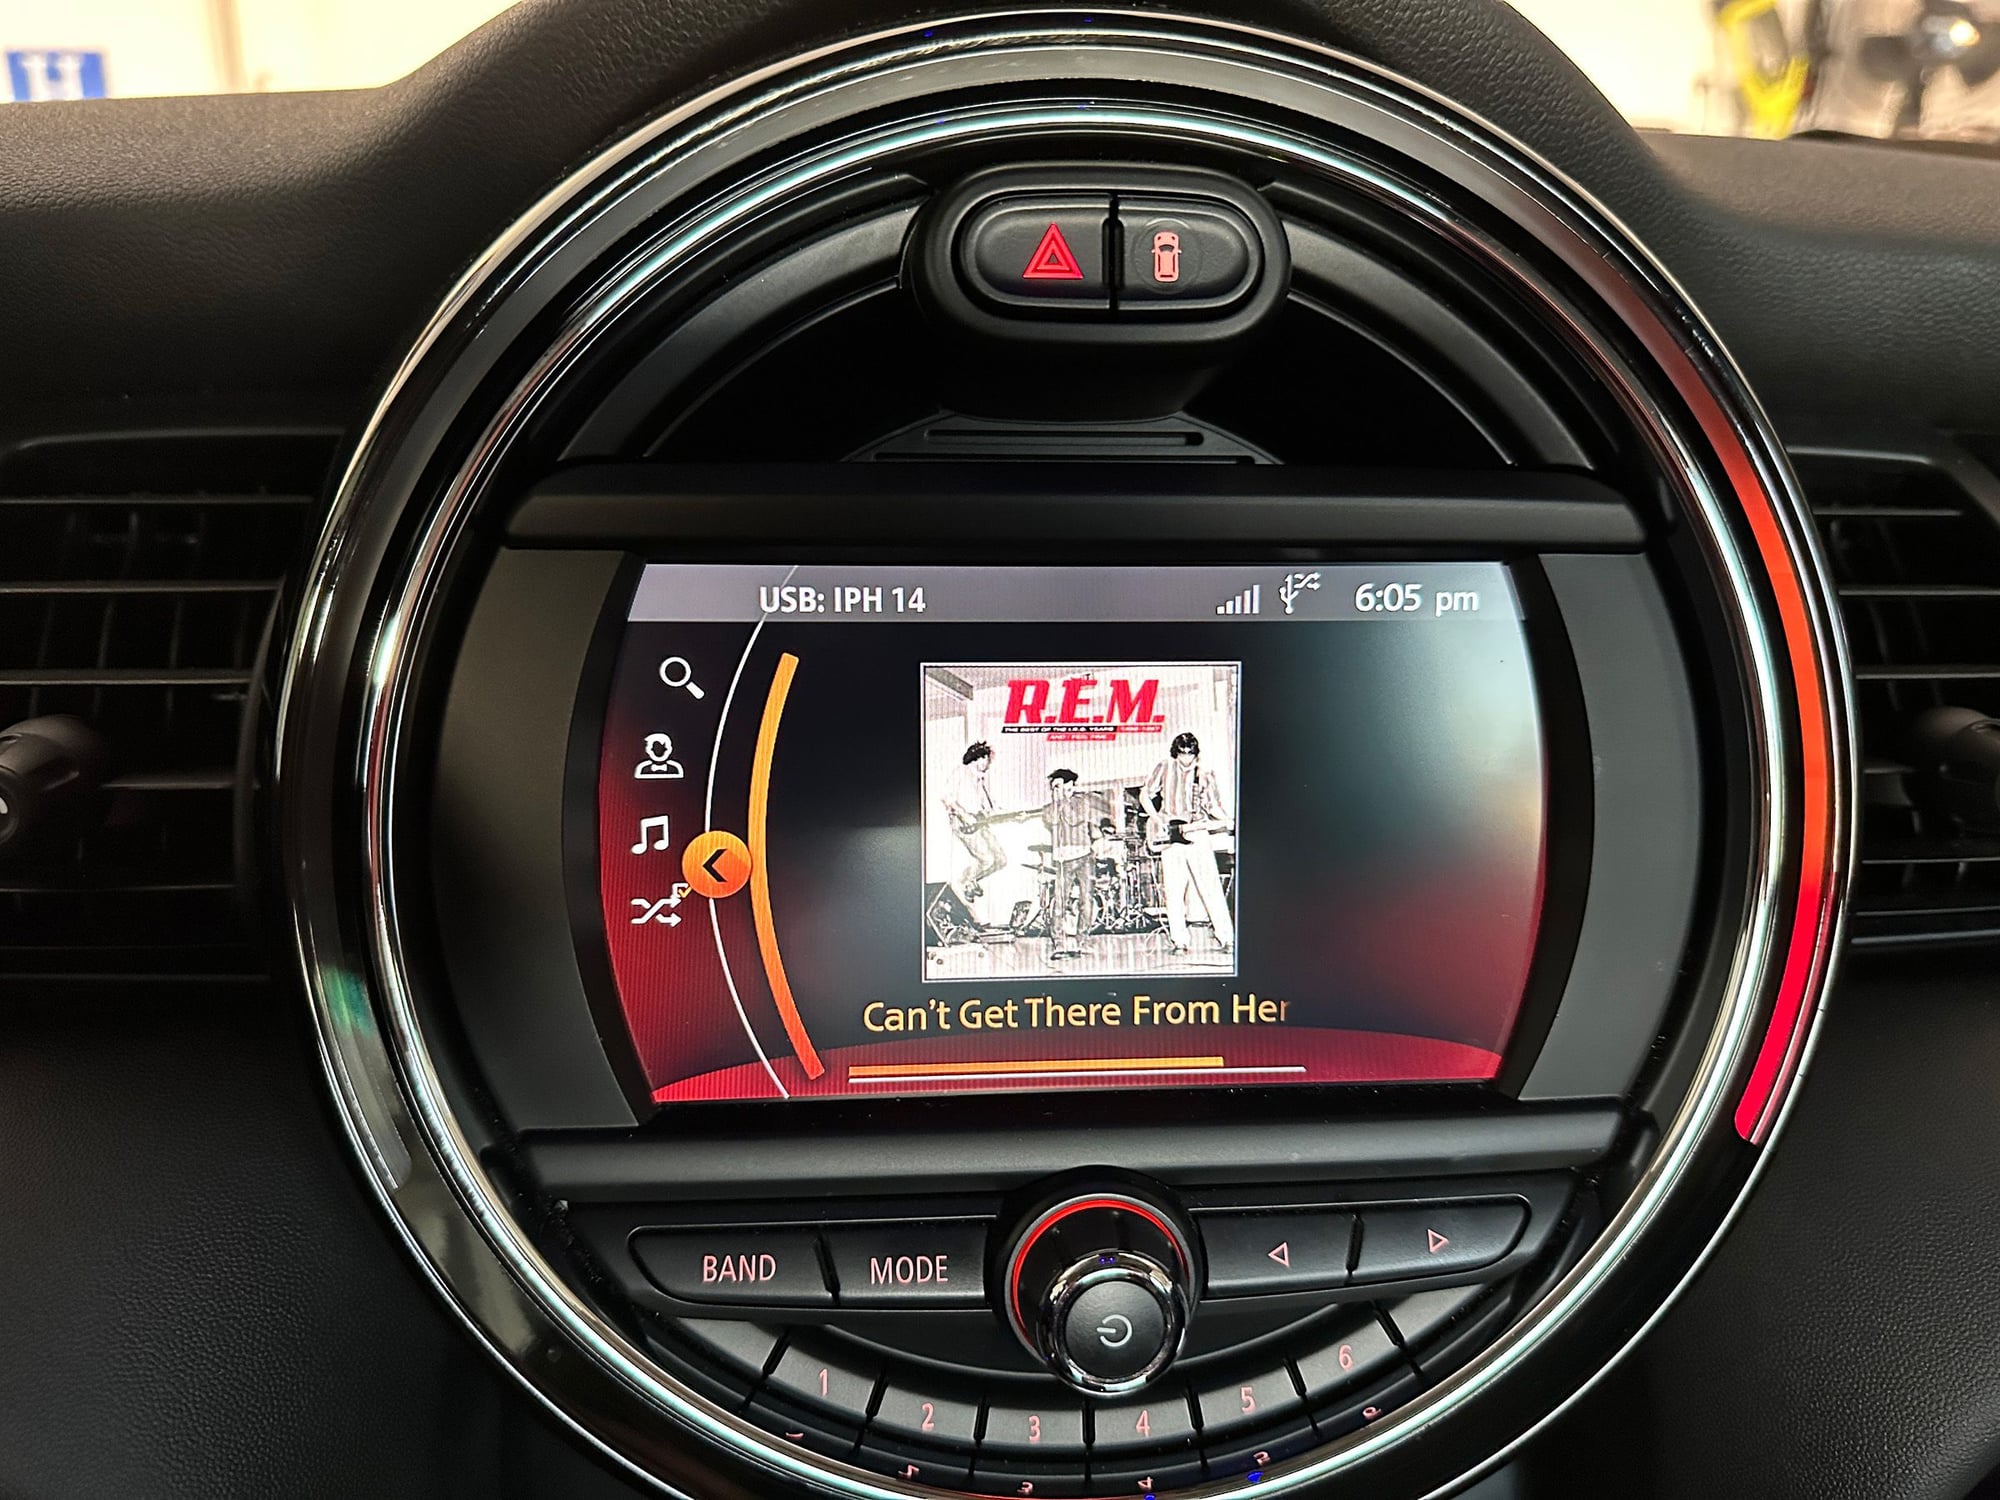 CarPlay is here finally! And it is glorious! - North American Motoring